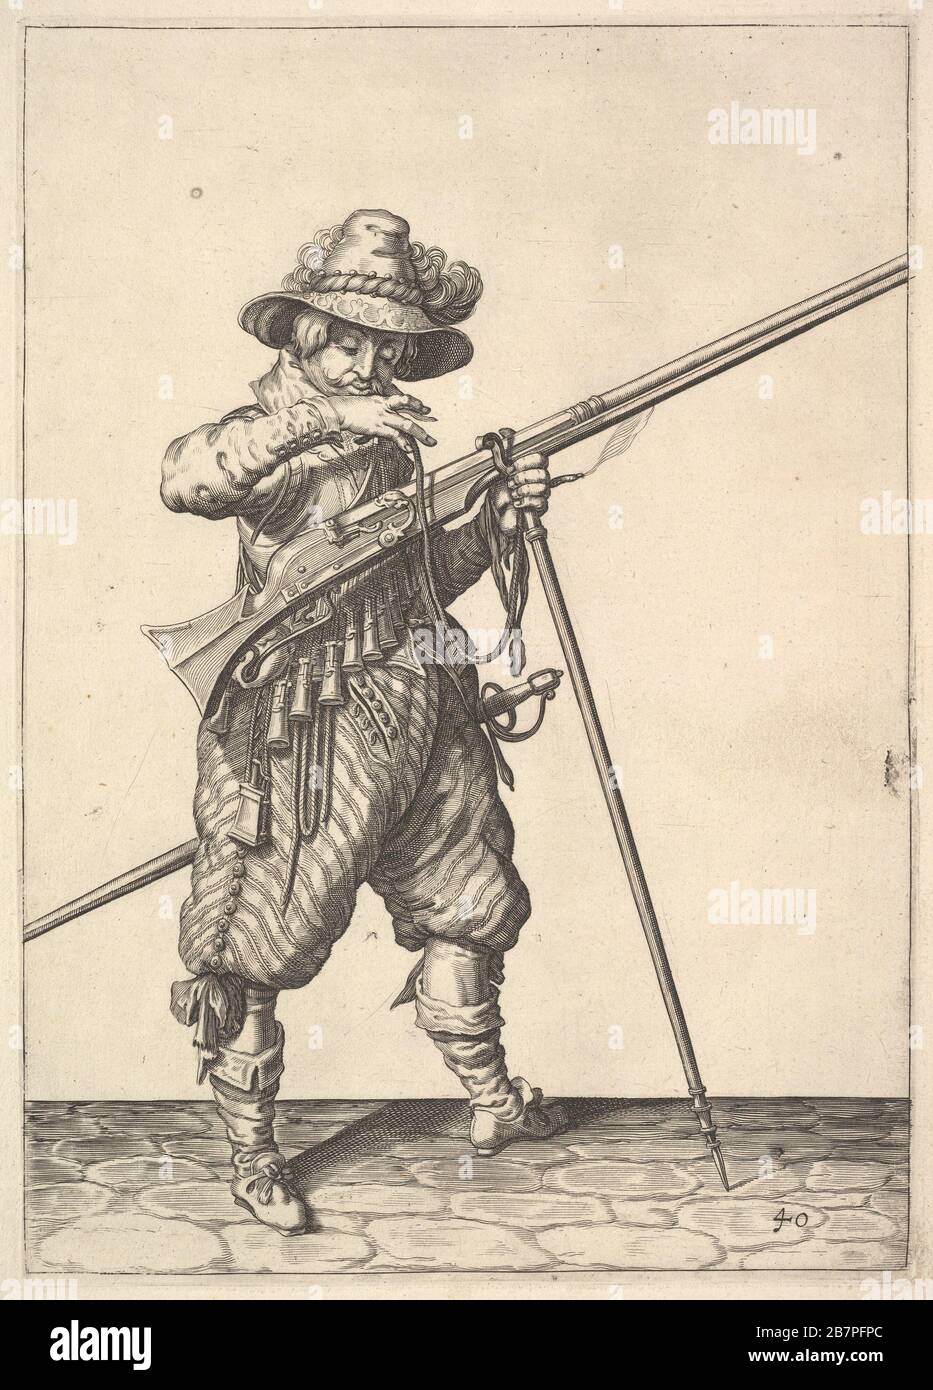 A soldier blowing on a match, from the Musketeers series, plate 40, in Wapenhandelinghe van Roers Musquetten Ende Spiessen (The Exercise of Arms). Stock Photo